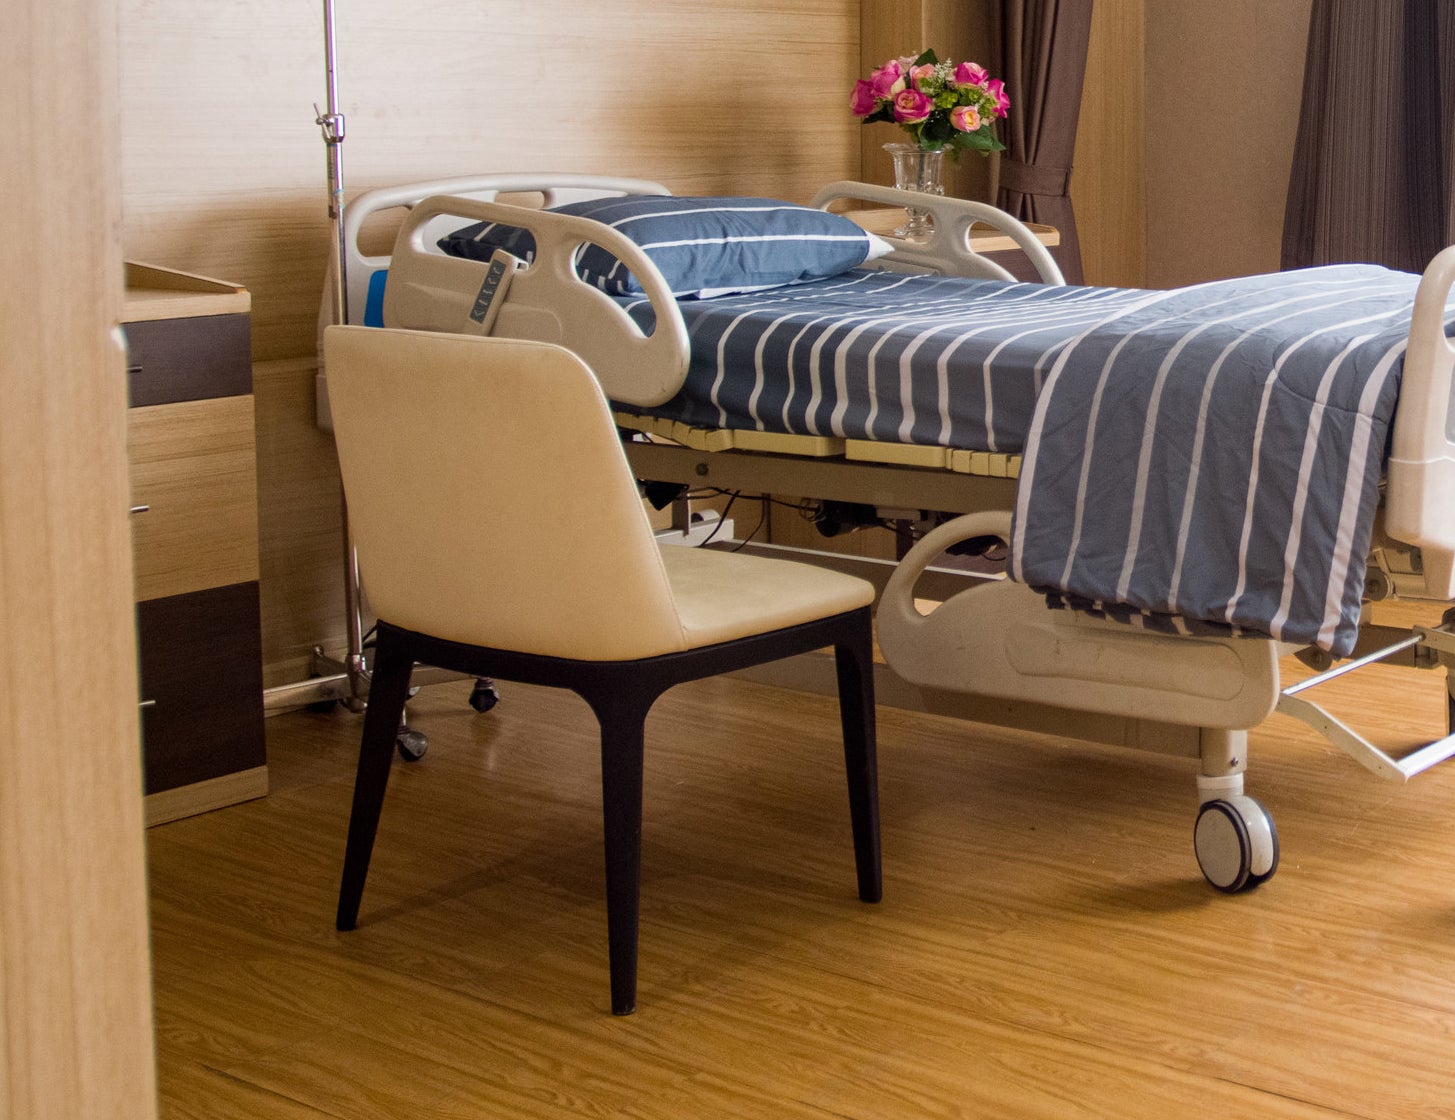 an empty chair faces a hospital bed in a hospital room